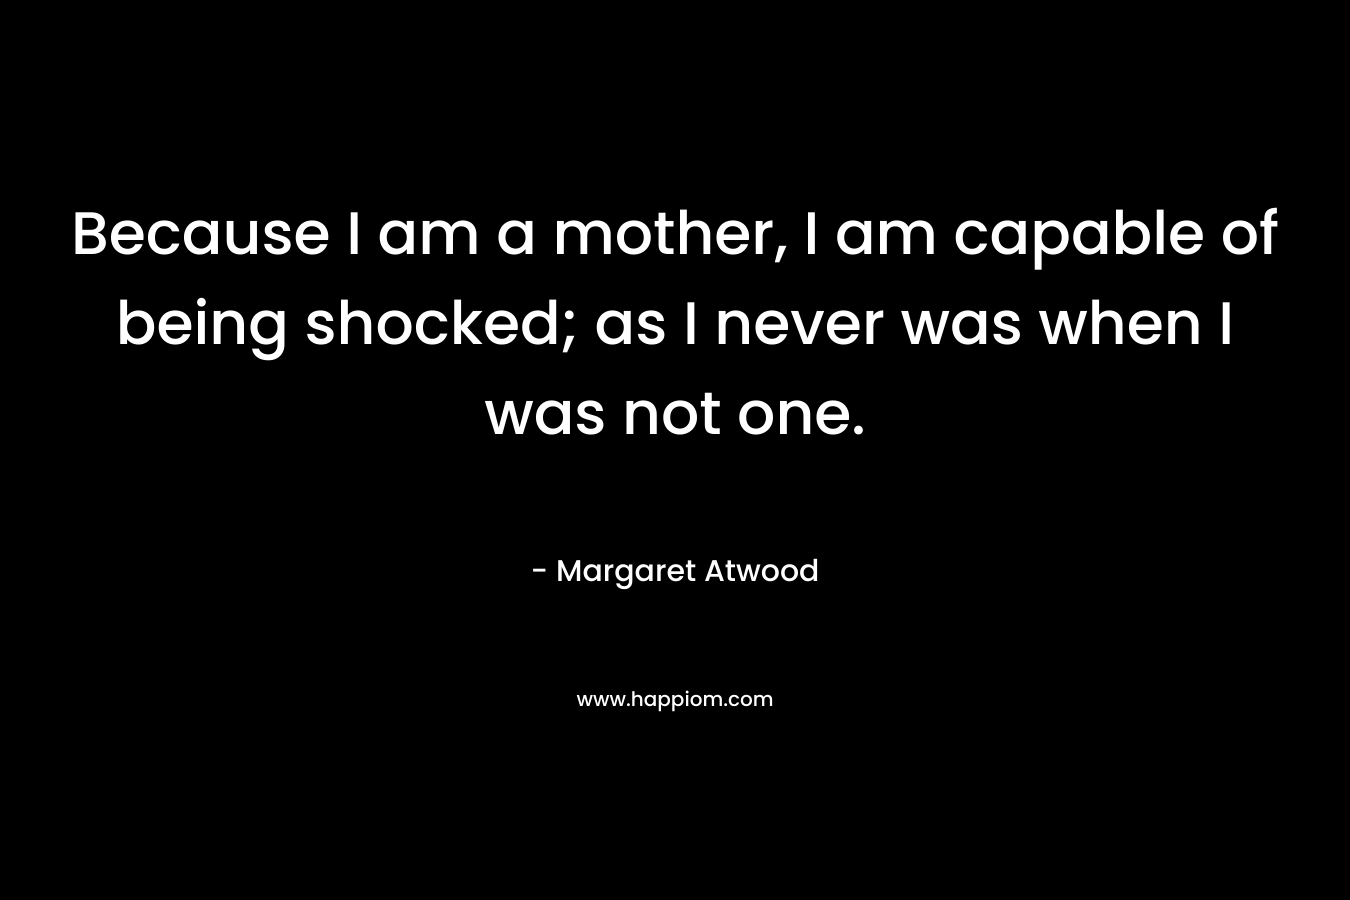 Because I am a mother, I am capable of being shocked; as I never was when I was not one.